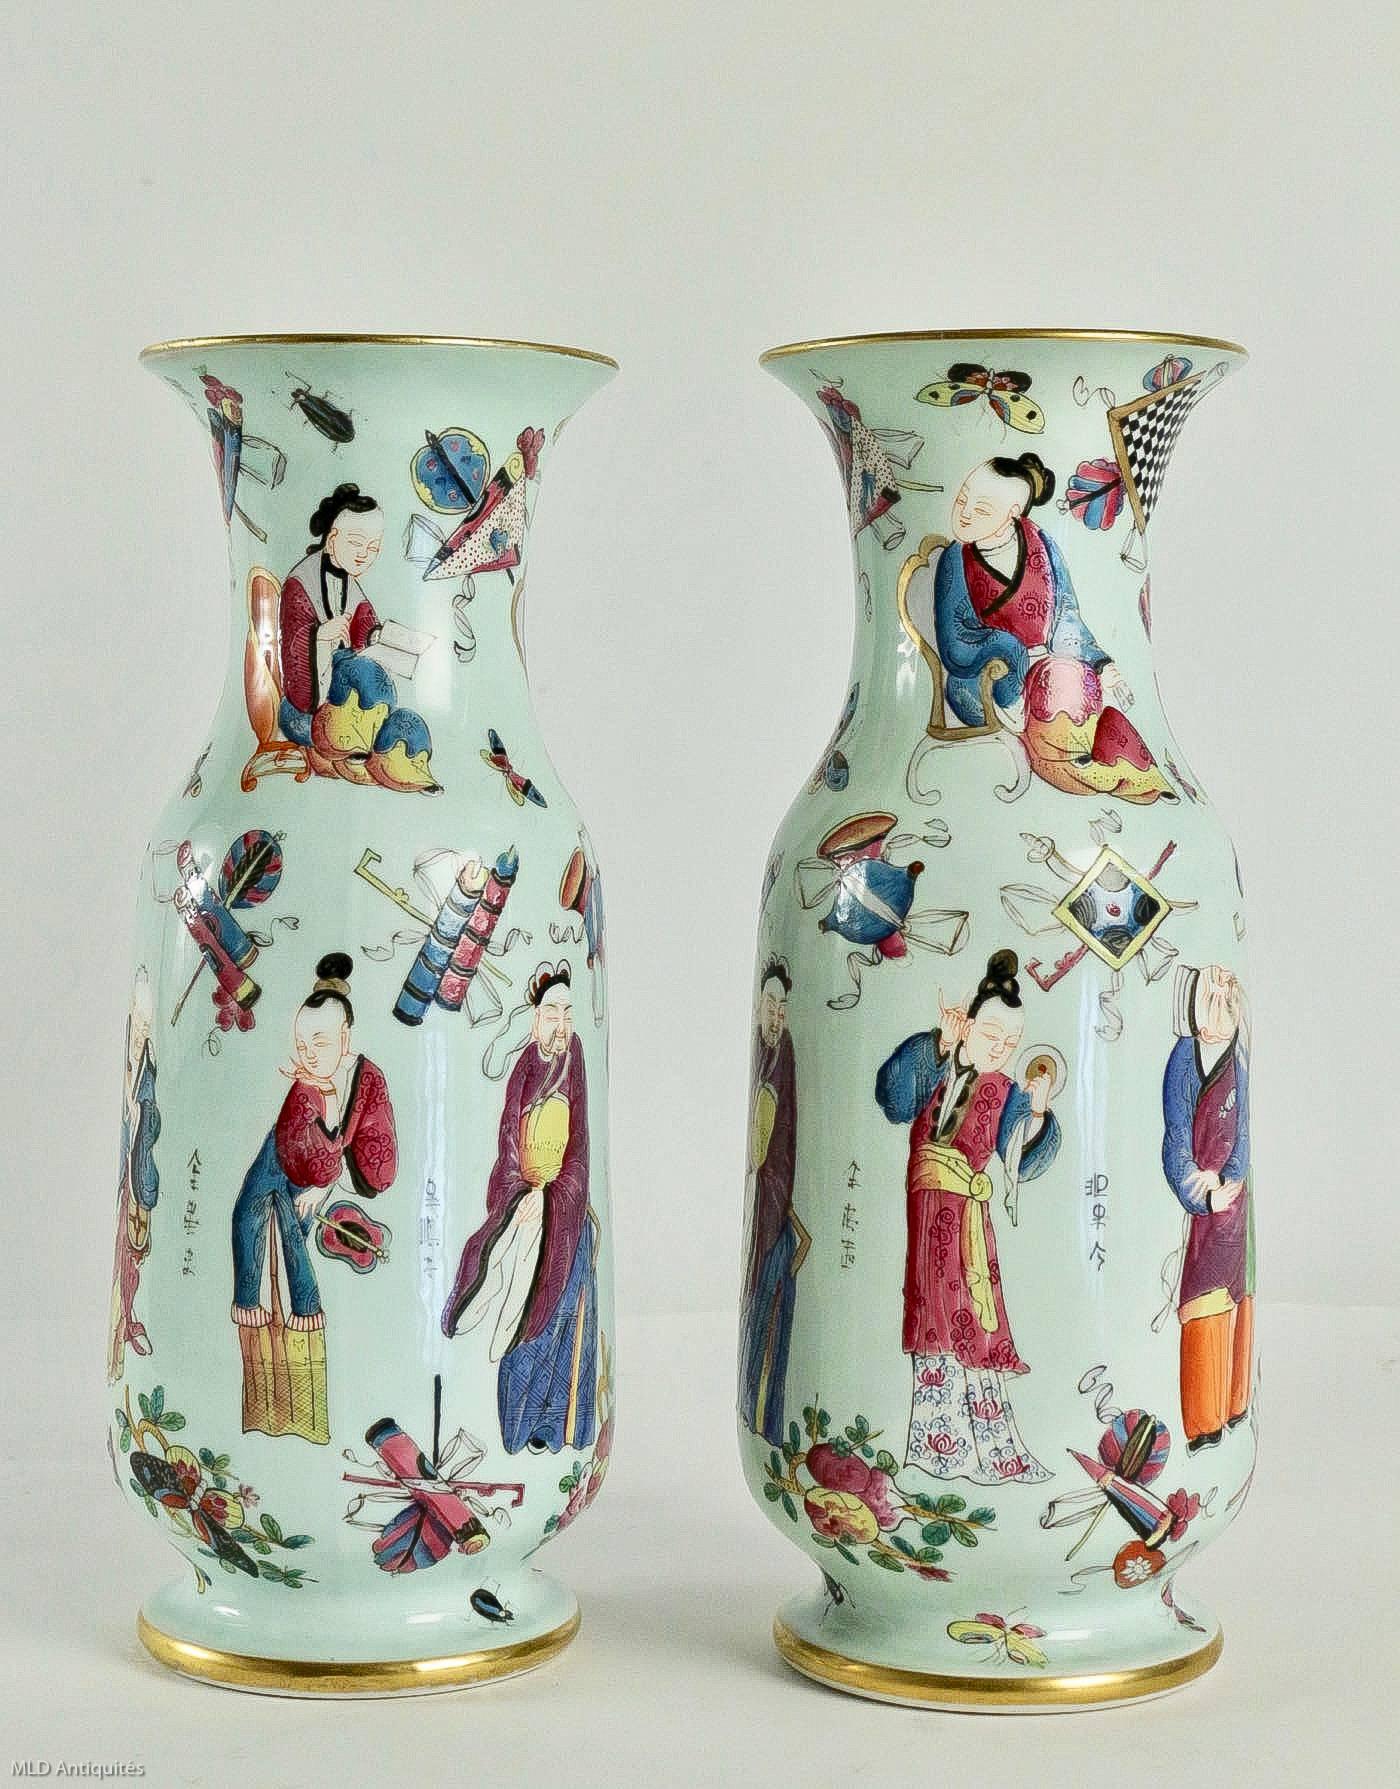 We have the pleasure to present to you an interesting and decorative French porcelain pair of vases decorated in the chinoiserie taste. Celadon Family

Very fine quality of porcelain of Bayeux Manufacture, circa 1850.

Sizes: 14.17 in H, 5.11 in